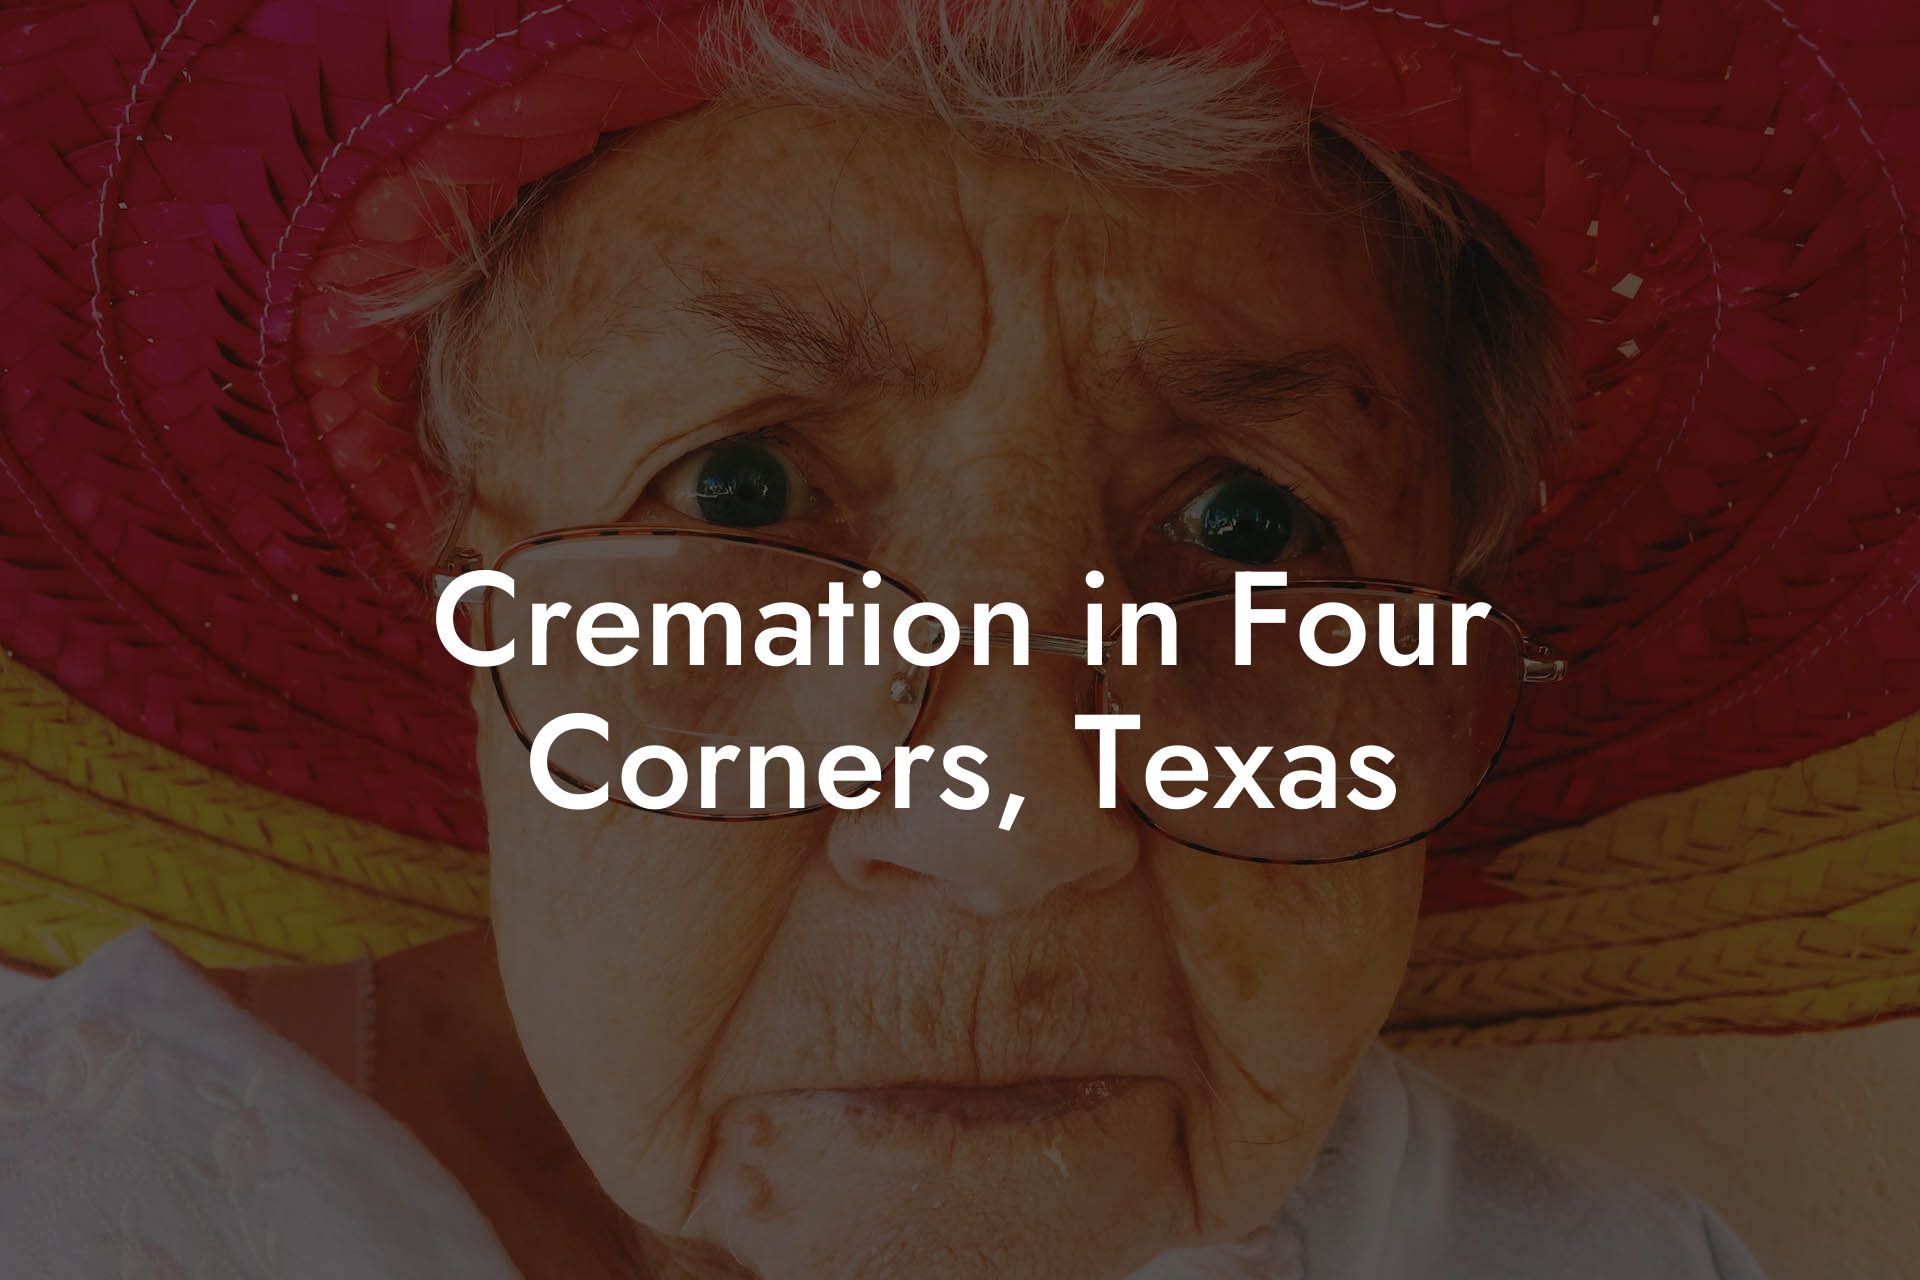 Cremation in Four Corners, Texas